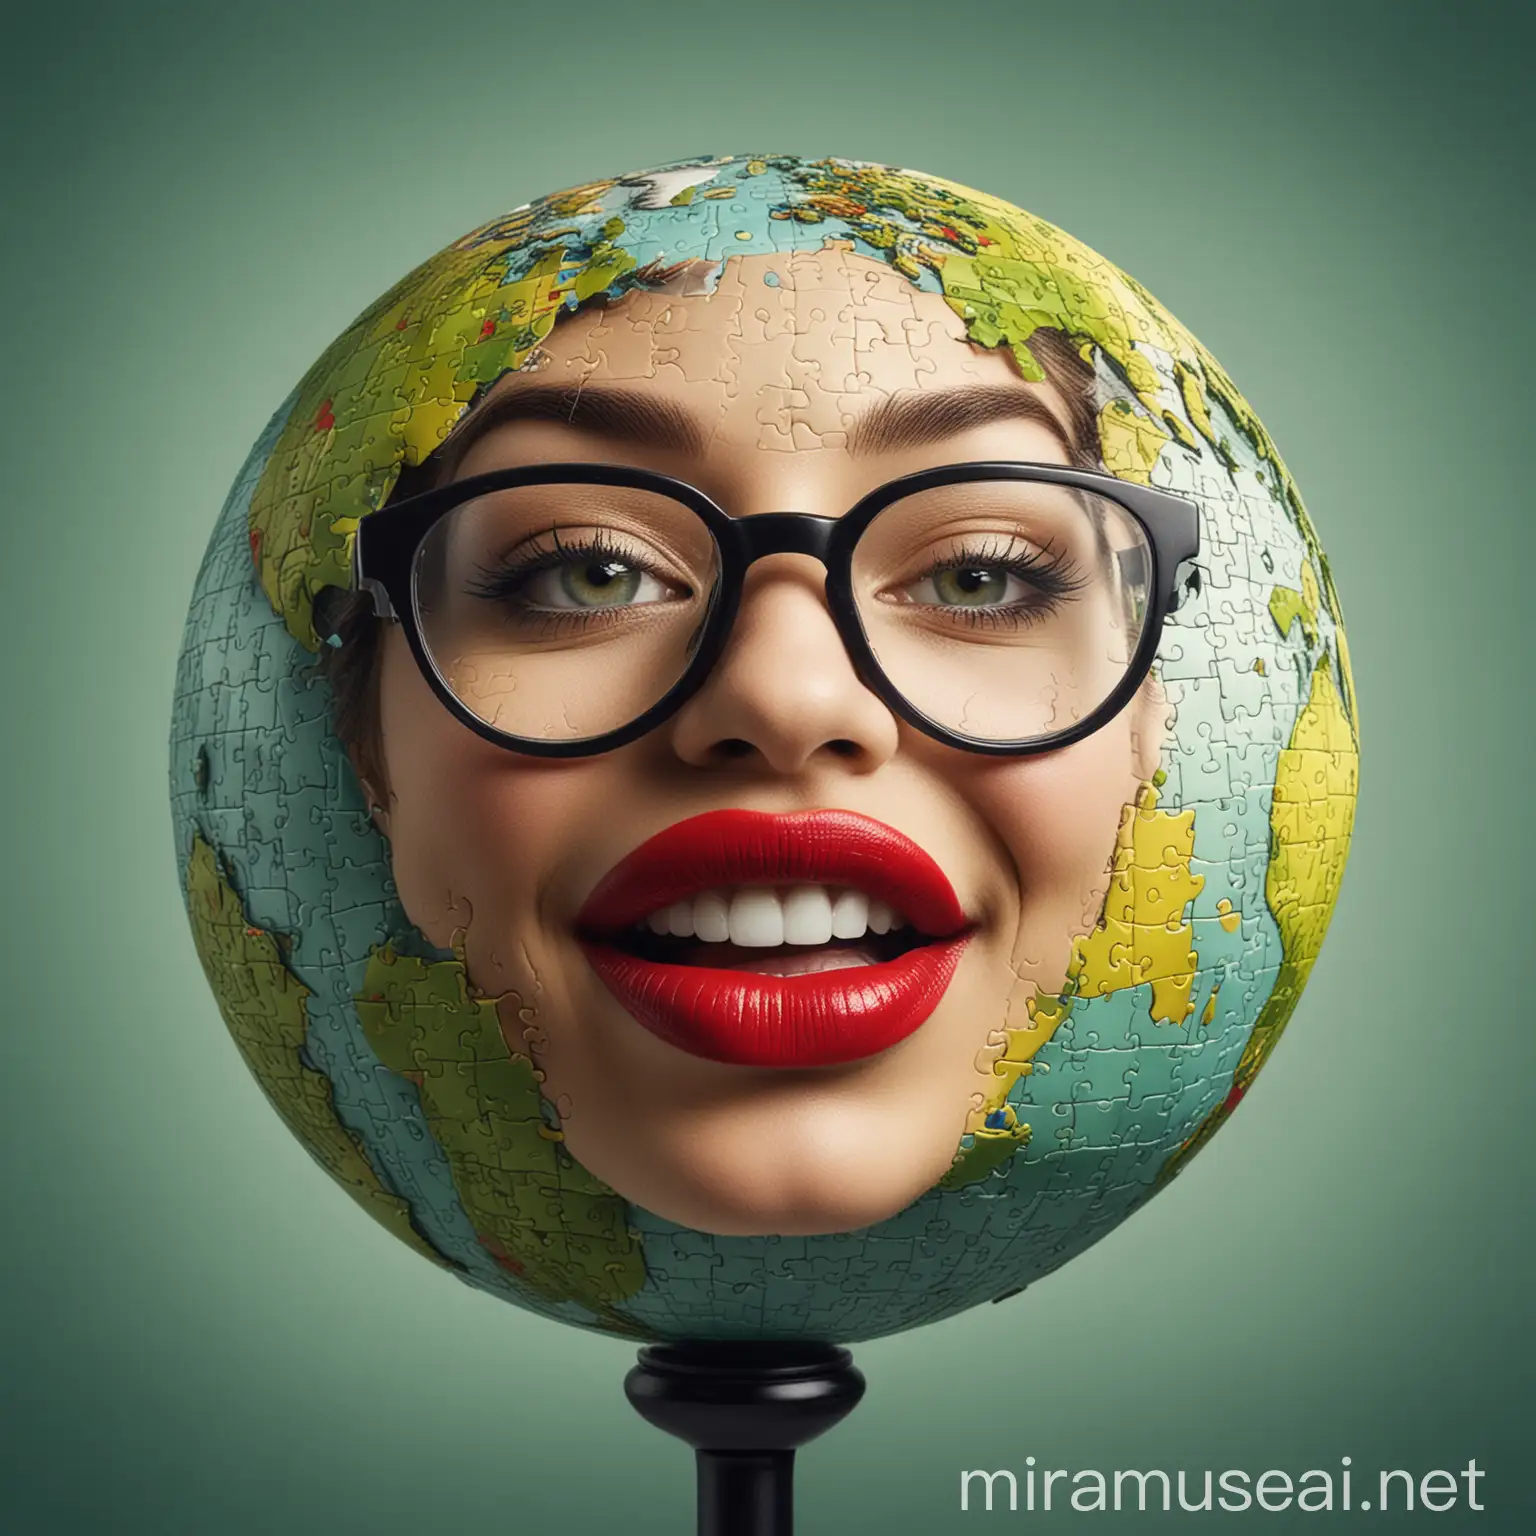 Use a background image that represents a stylized a globe. Add elements as small curiosity symbols (like puzzle pieces, books, landmarks). put glasses
green and blue as main colour. Insert a female big mouth with red lips, which is biting the image you just generated. Background colour bright yellow.Realistic